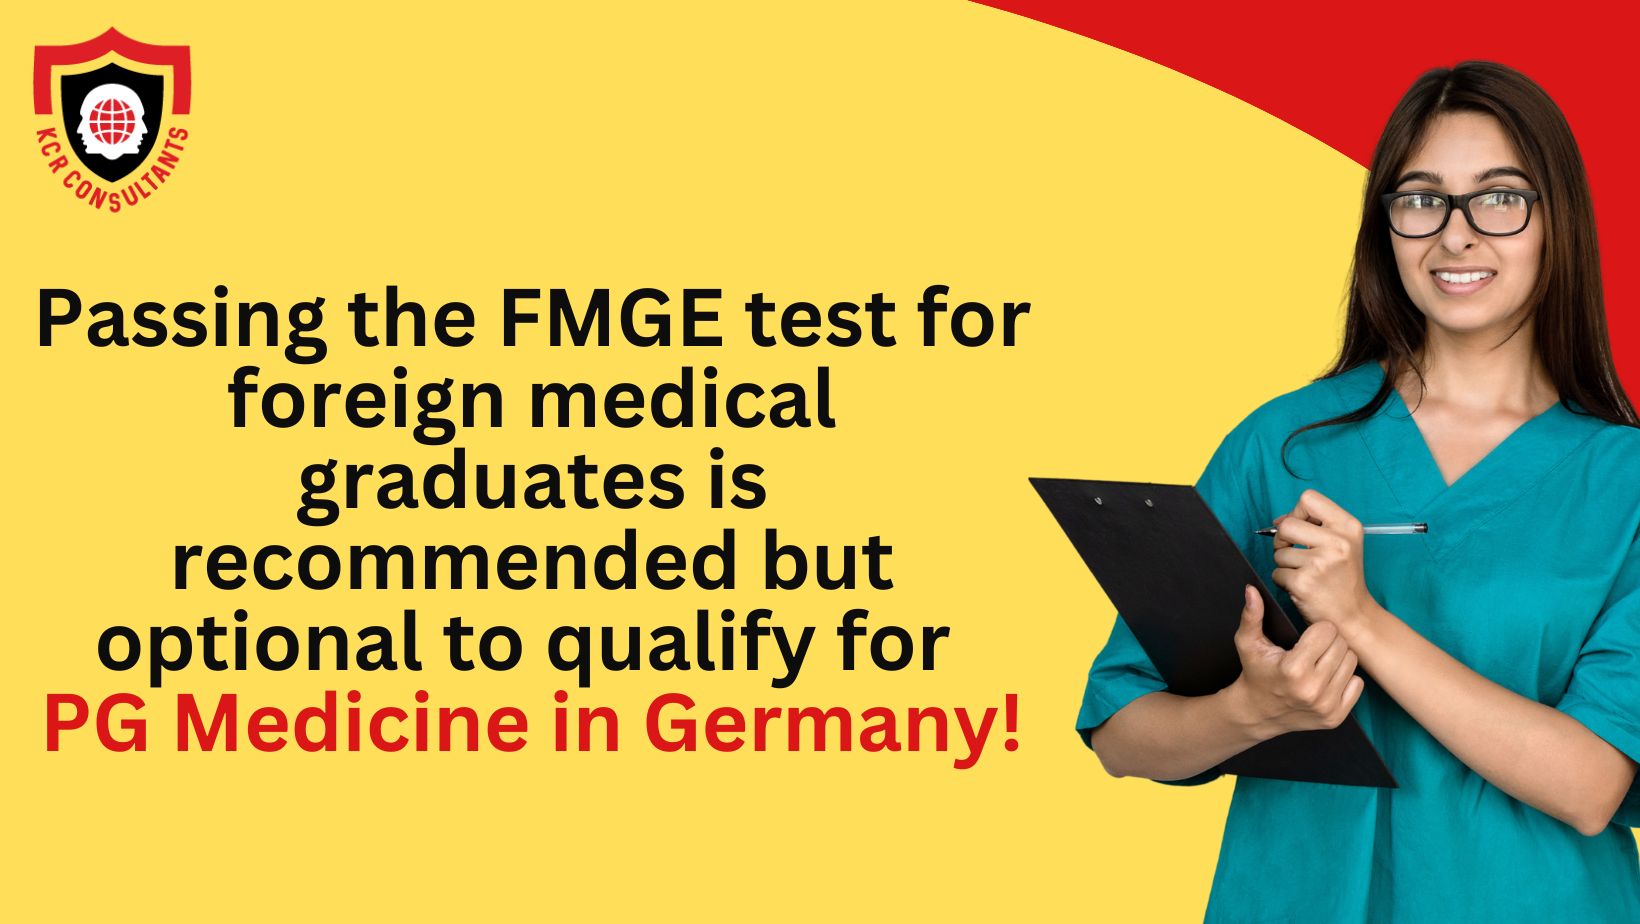 PG Medicine in Germany without passing FMGE